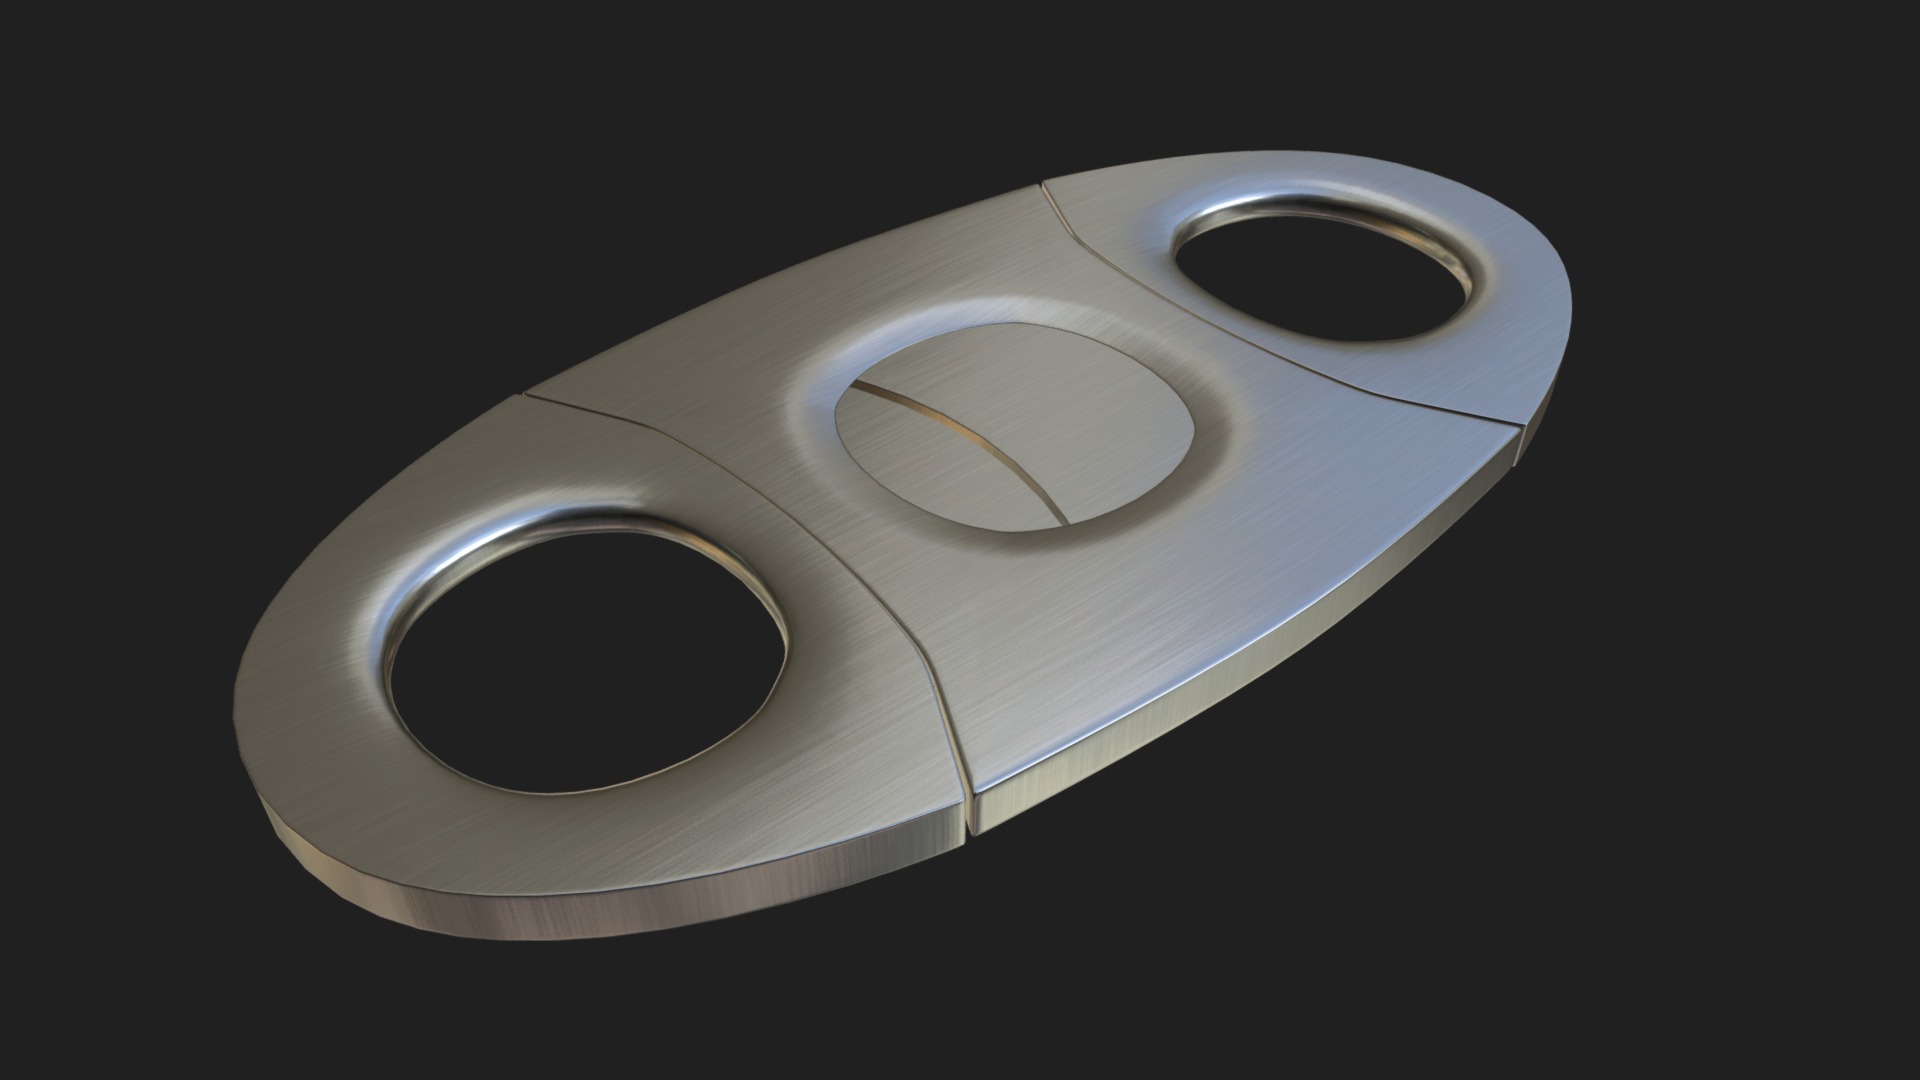 3D model Guillotine cigar cutter - This is a 3D model of the Guillotine cigar cutter. The 3D model is about a white computer mouse.